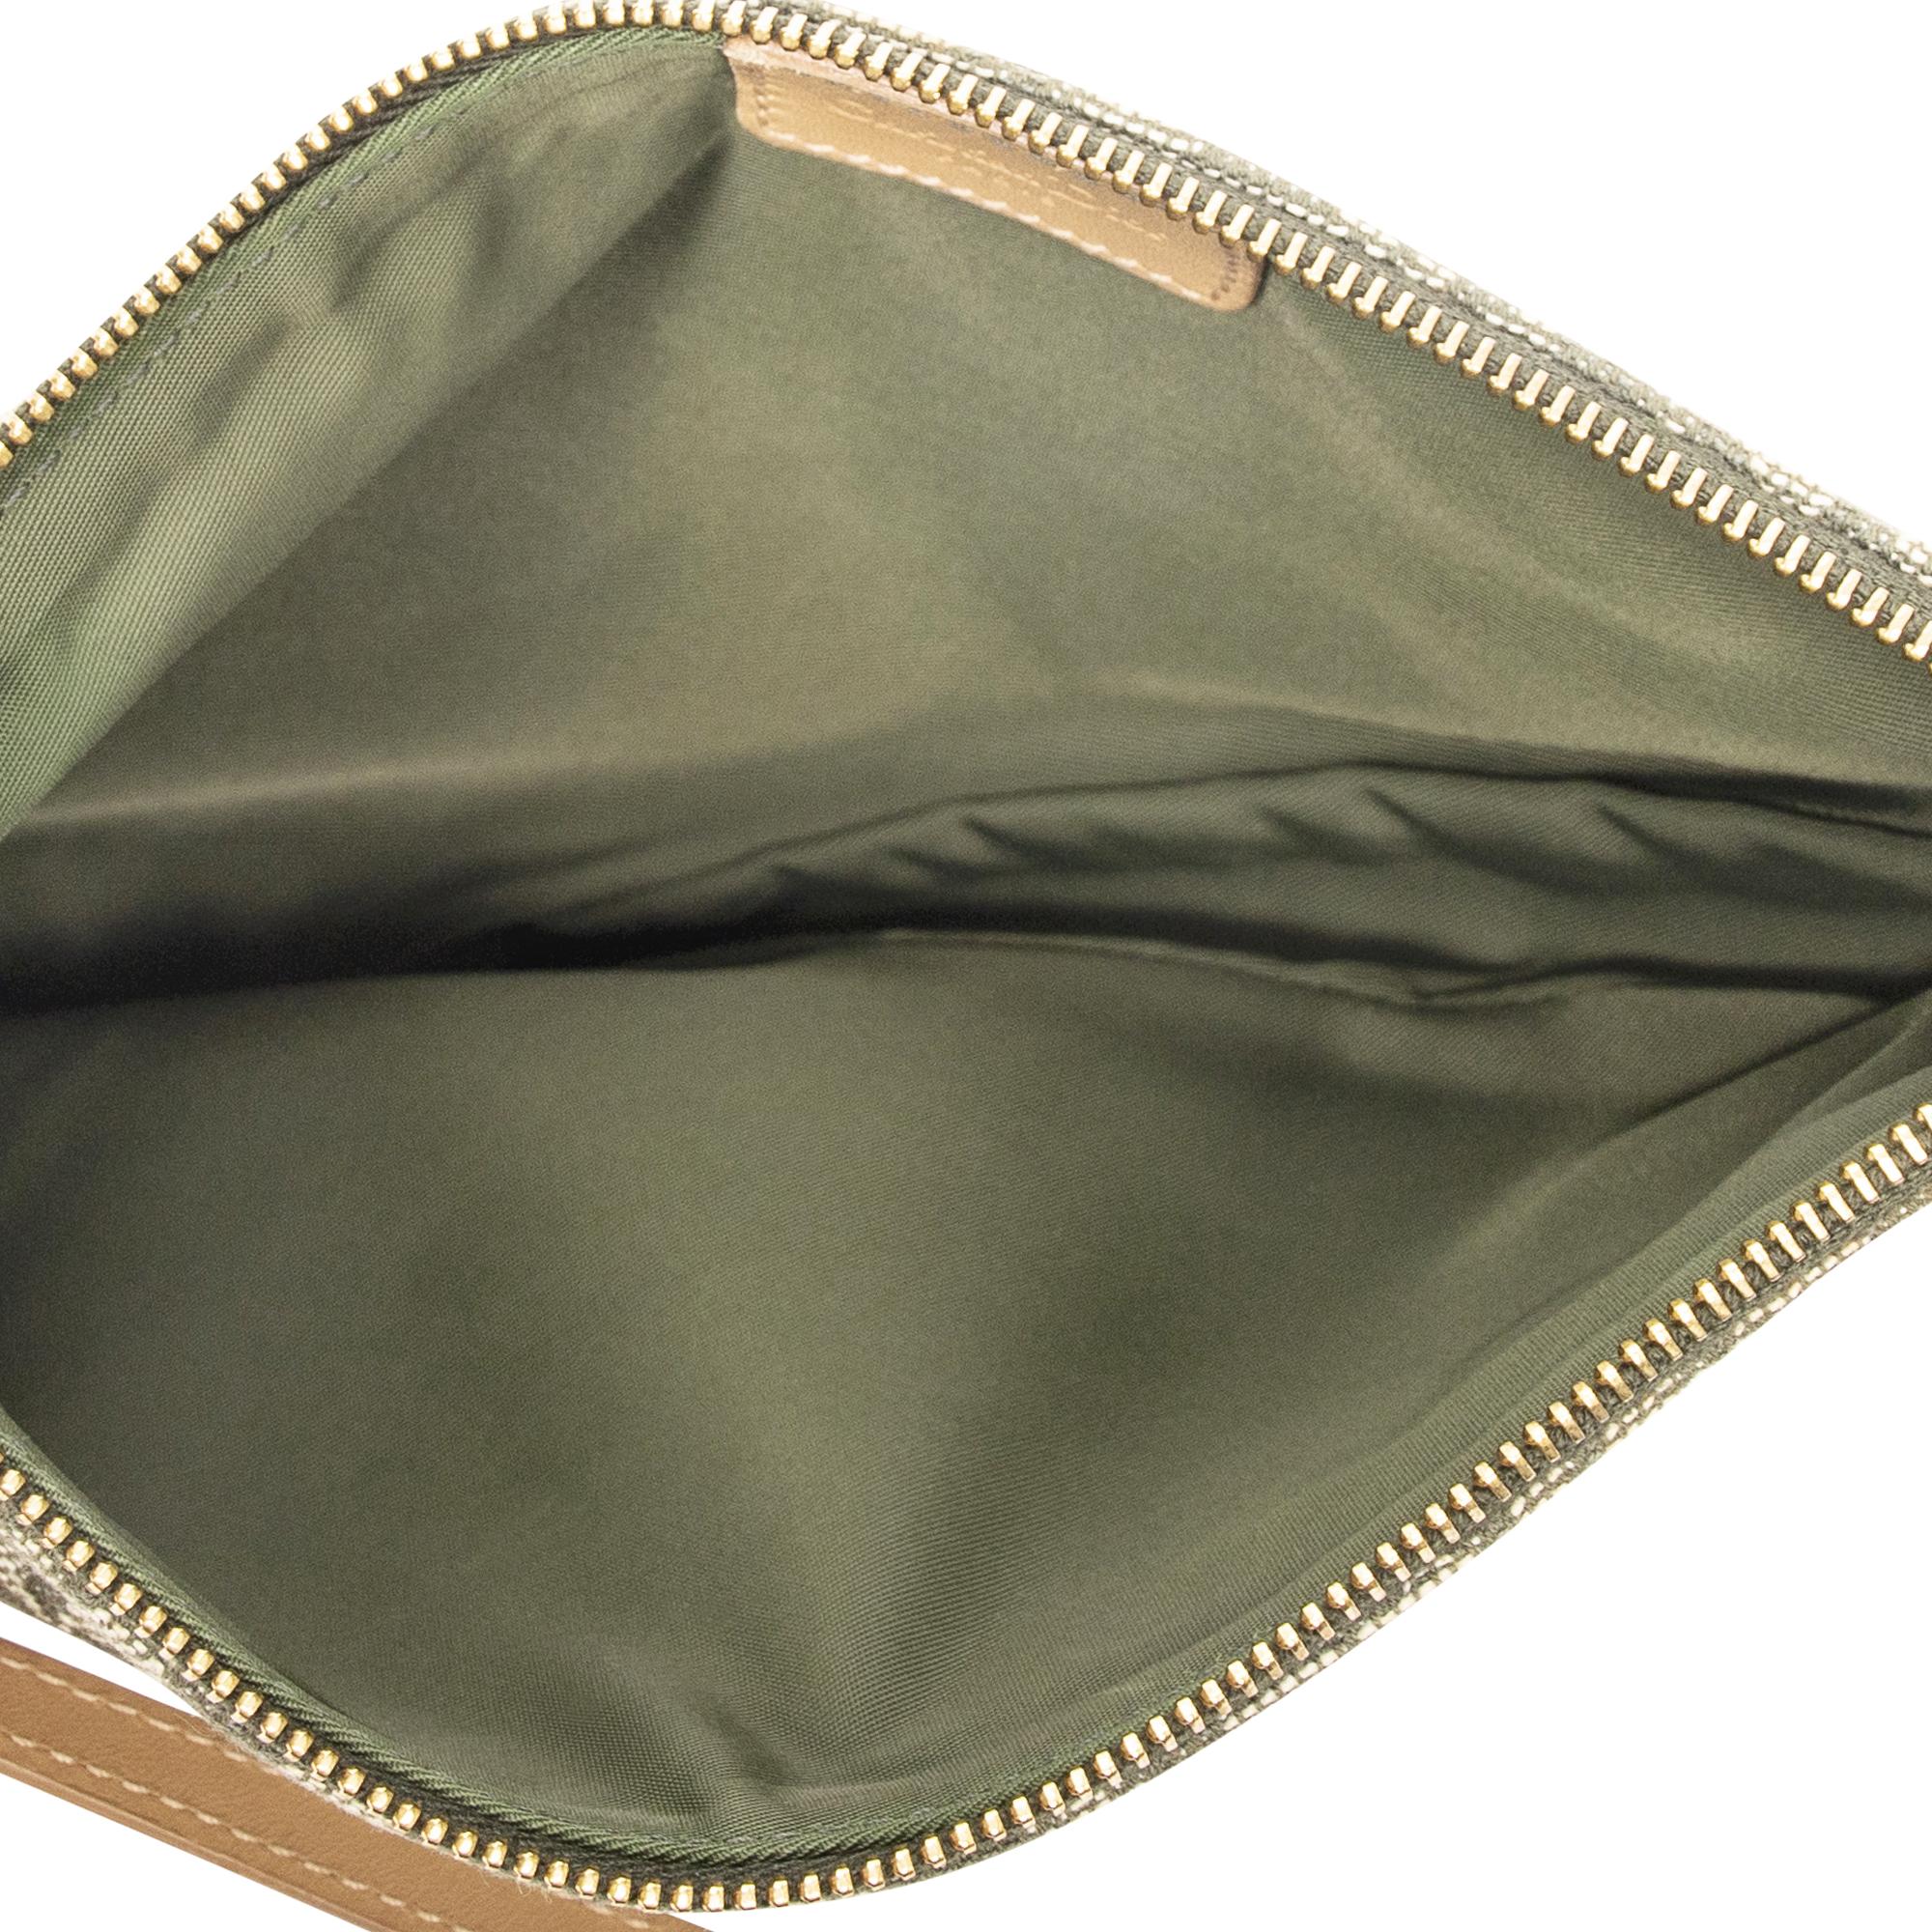 Dior by John Galliano 2001 Olive Green Saddle For Sale 1